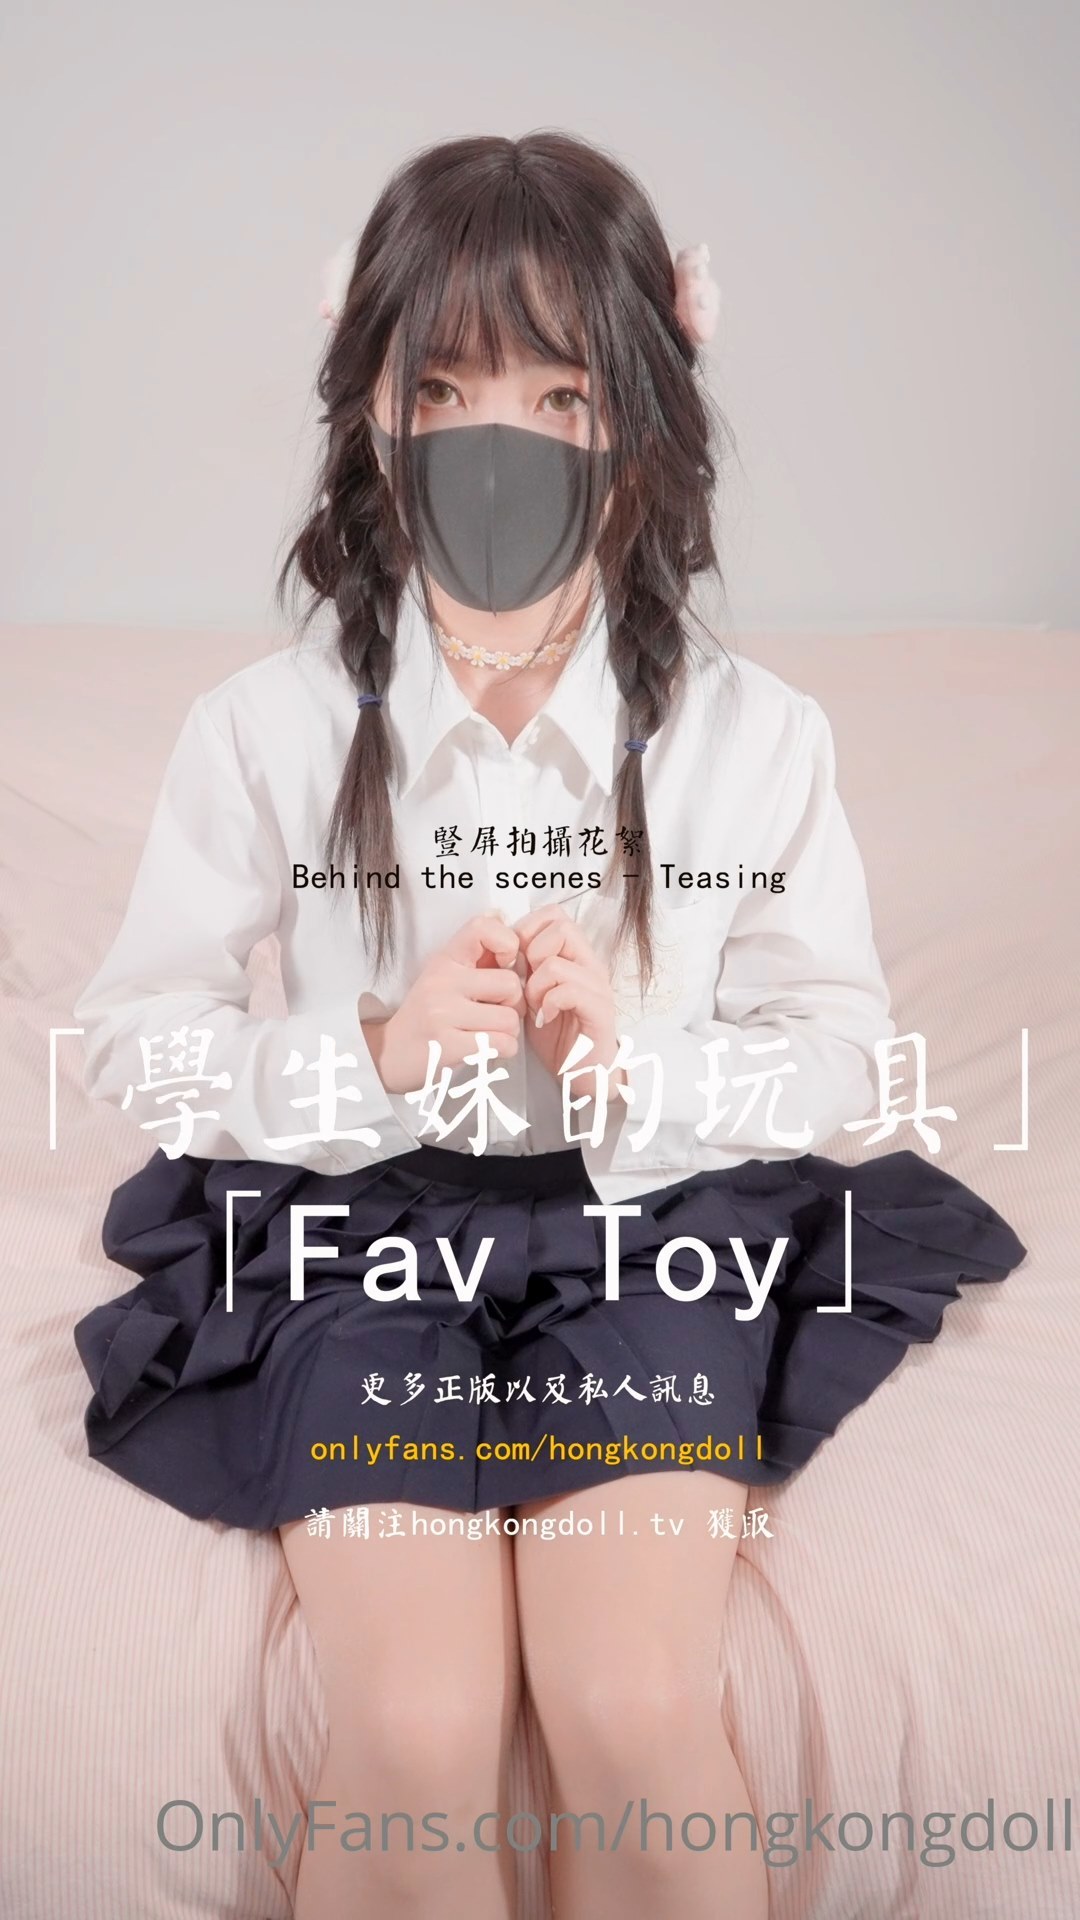 [OnlyFans.com] Fav Toy (Hong Kong Doll) [uncen] [2023 г., Solo, Masturbation, Toy, 1080p]